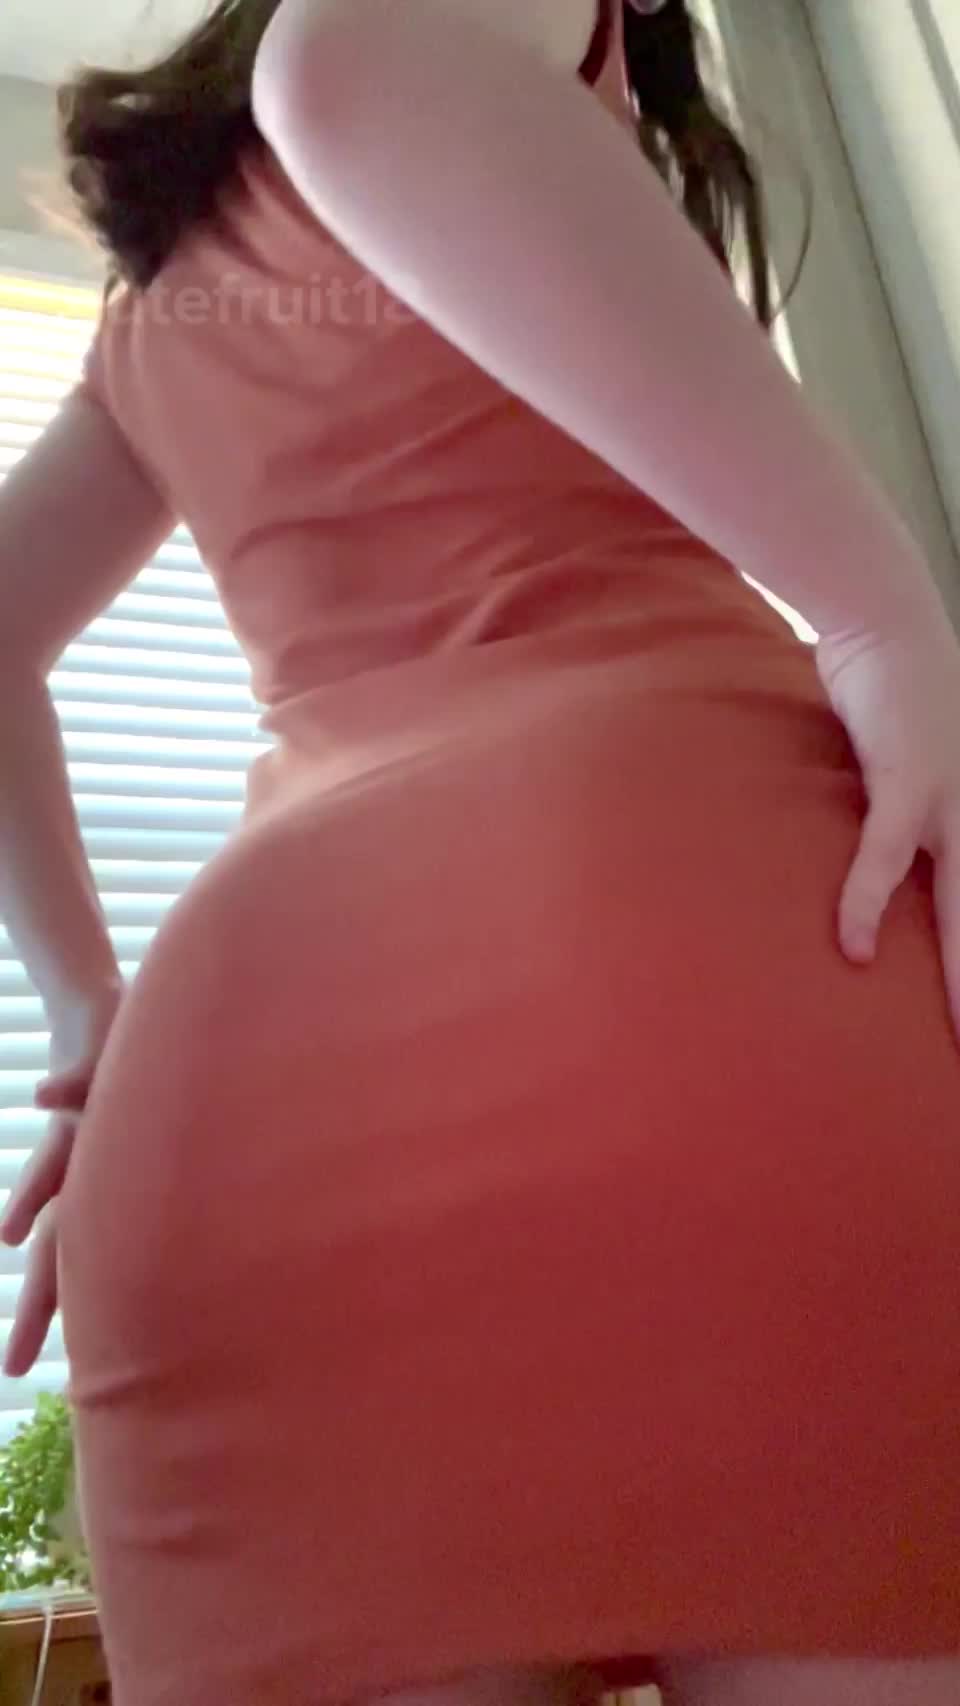 does it turn you on knowing i'm not wearing any panties under this dress? : video clip